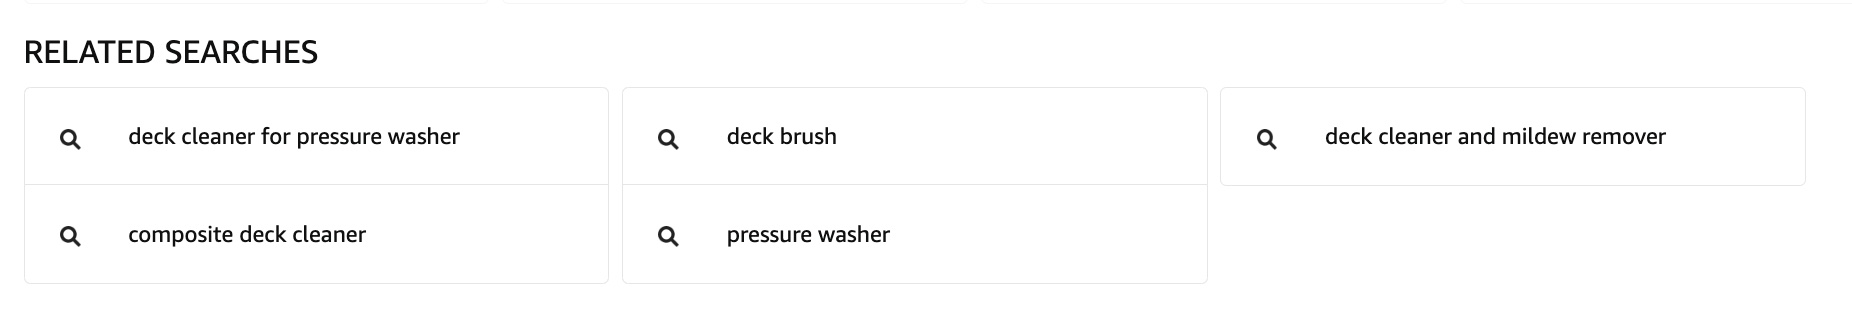 Screenshot of related searches for "deck cleaner"